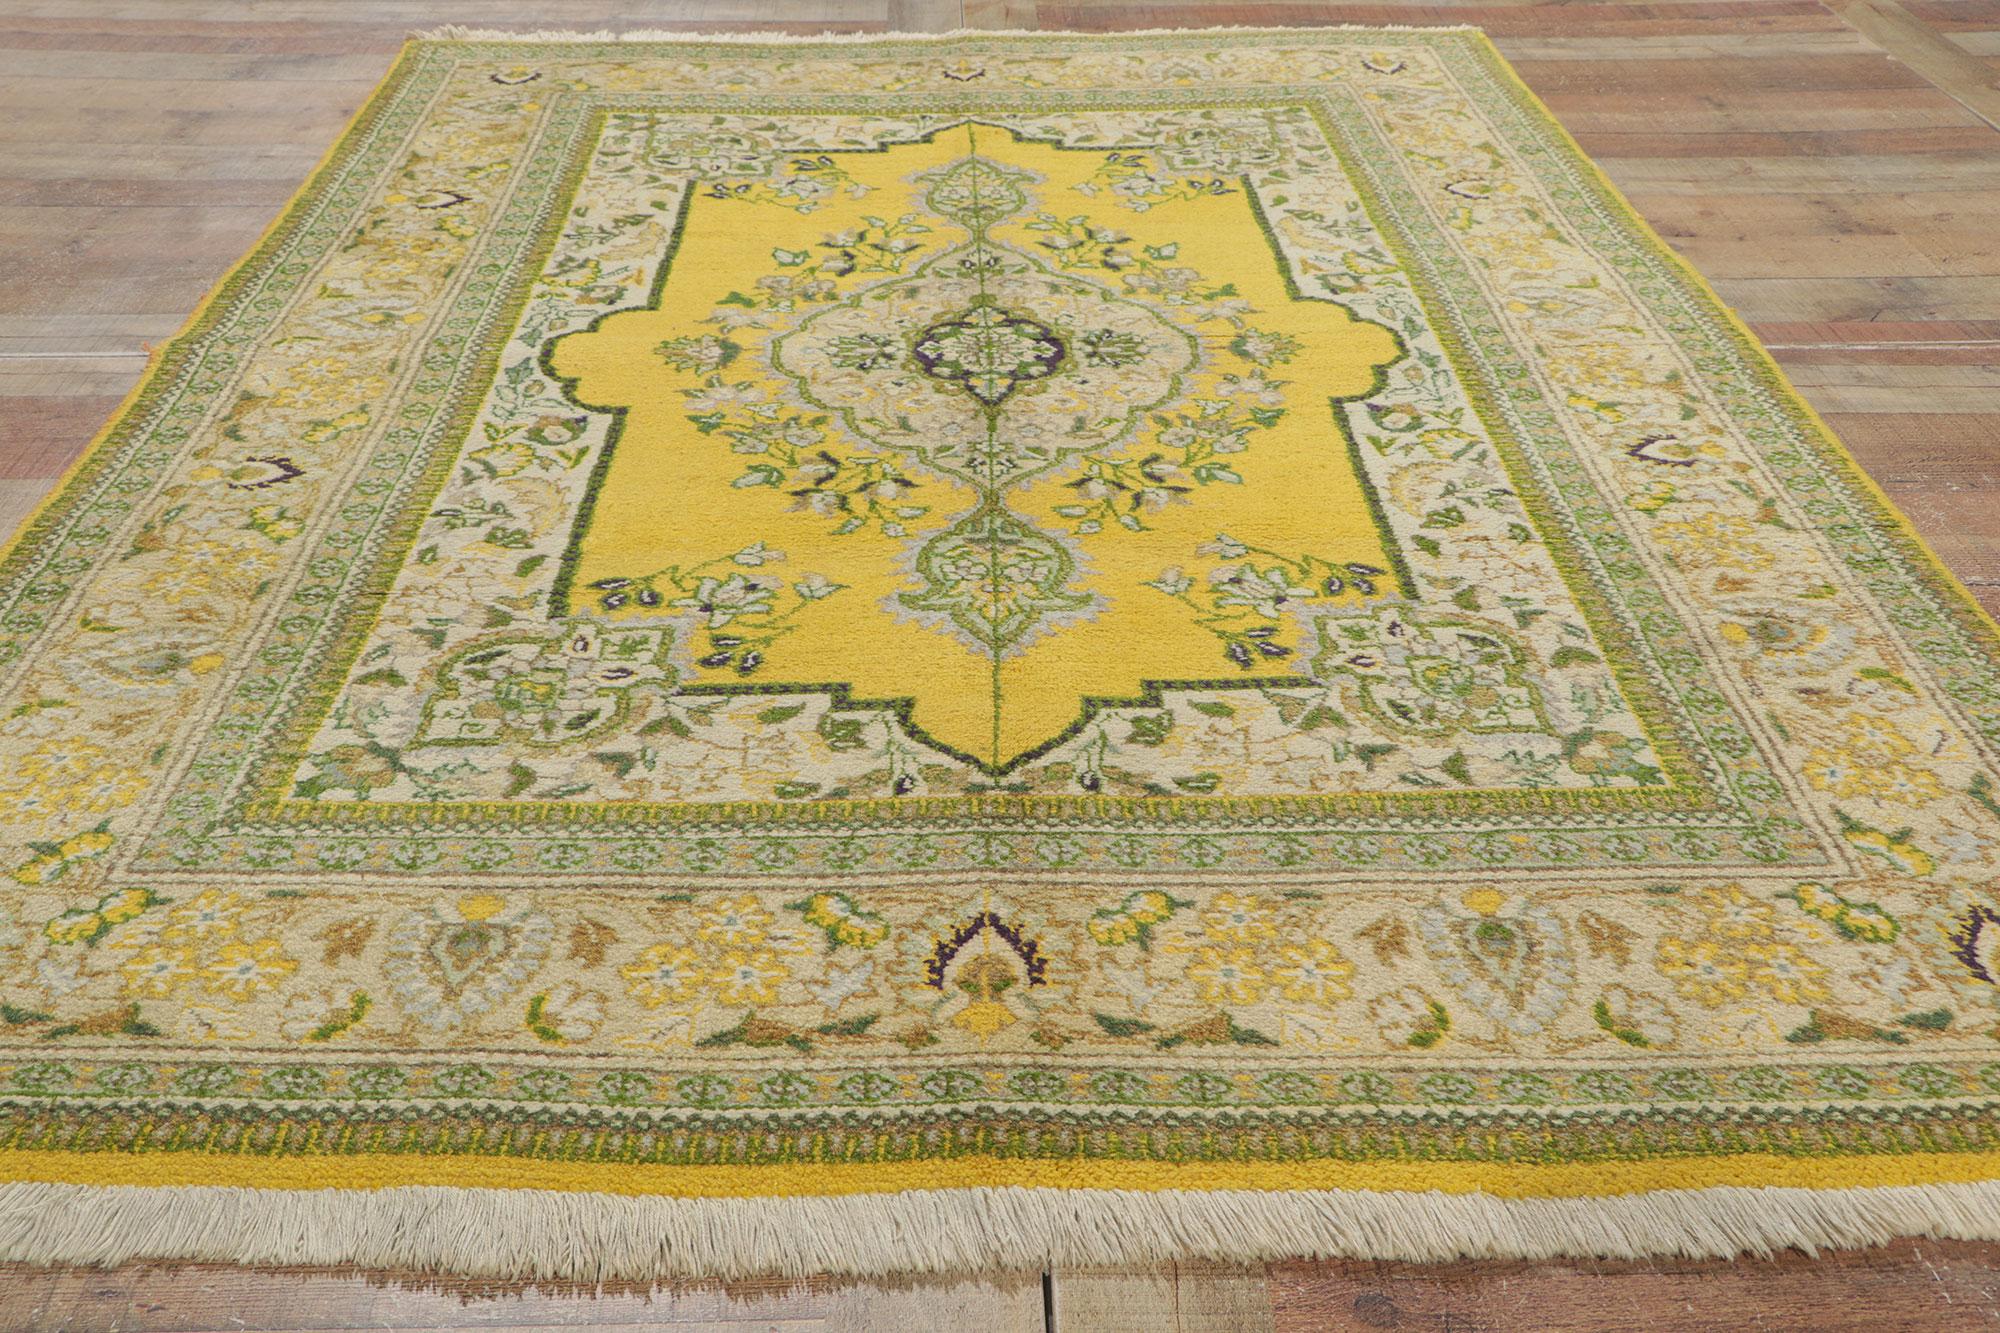 Colorful Vintage Persian Tabriz Rug with Vibrant Earth-Tone Colors For Sale 2